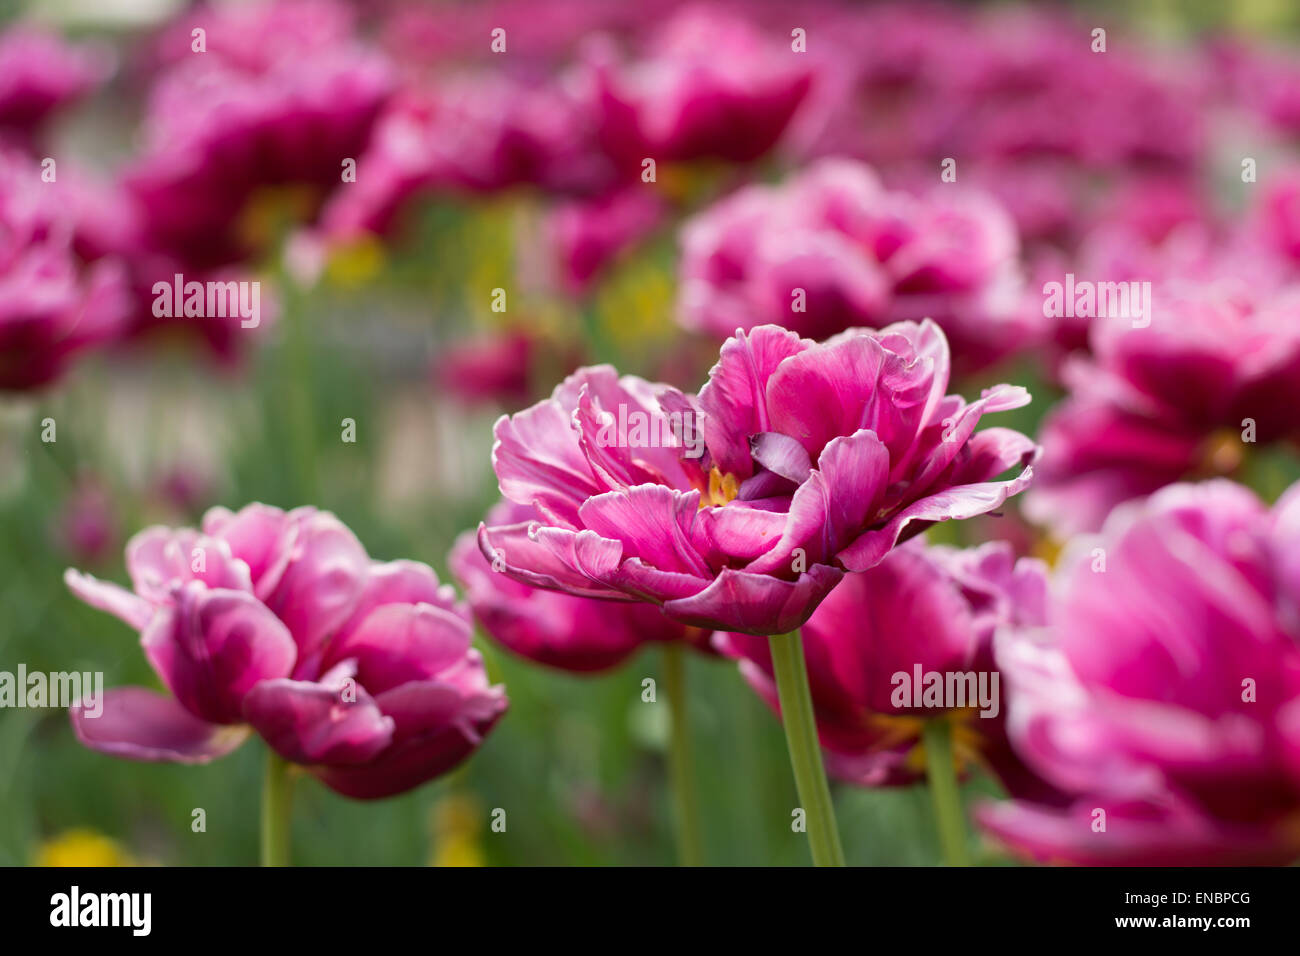 Lots of rose tulips blooming in the grass Stock Photo